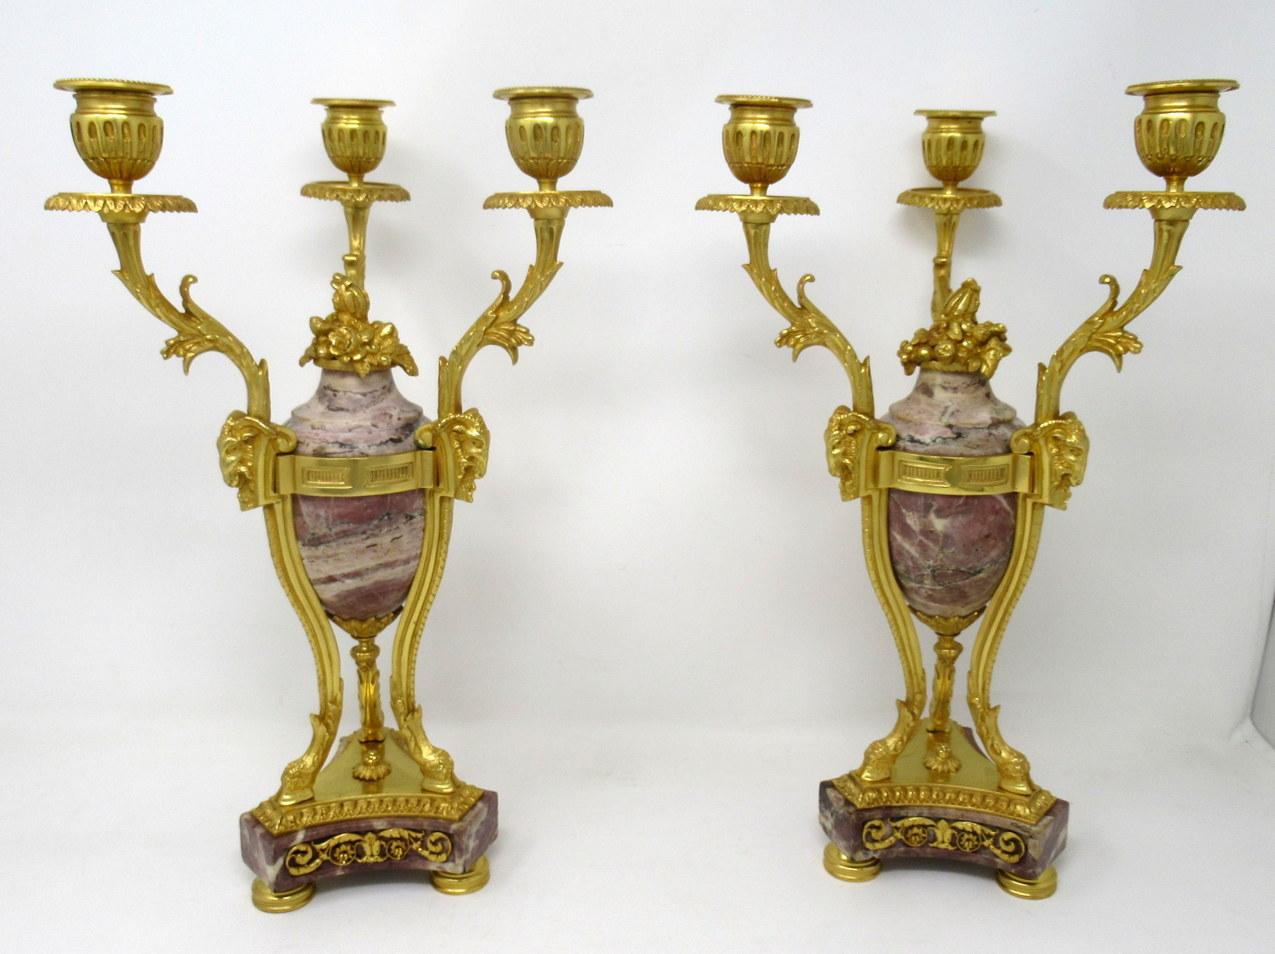 Stunning pair of French Ormolu and Breche Violet marble three-arm candelabra of generous proportions, attributed to Pierre-Philippe Thomire, made during the second quarter of the 19th century.

The three foliate outswept arms spreading from a